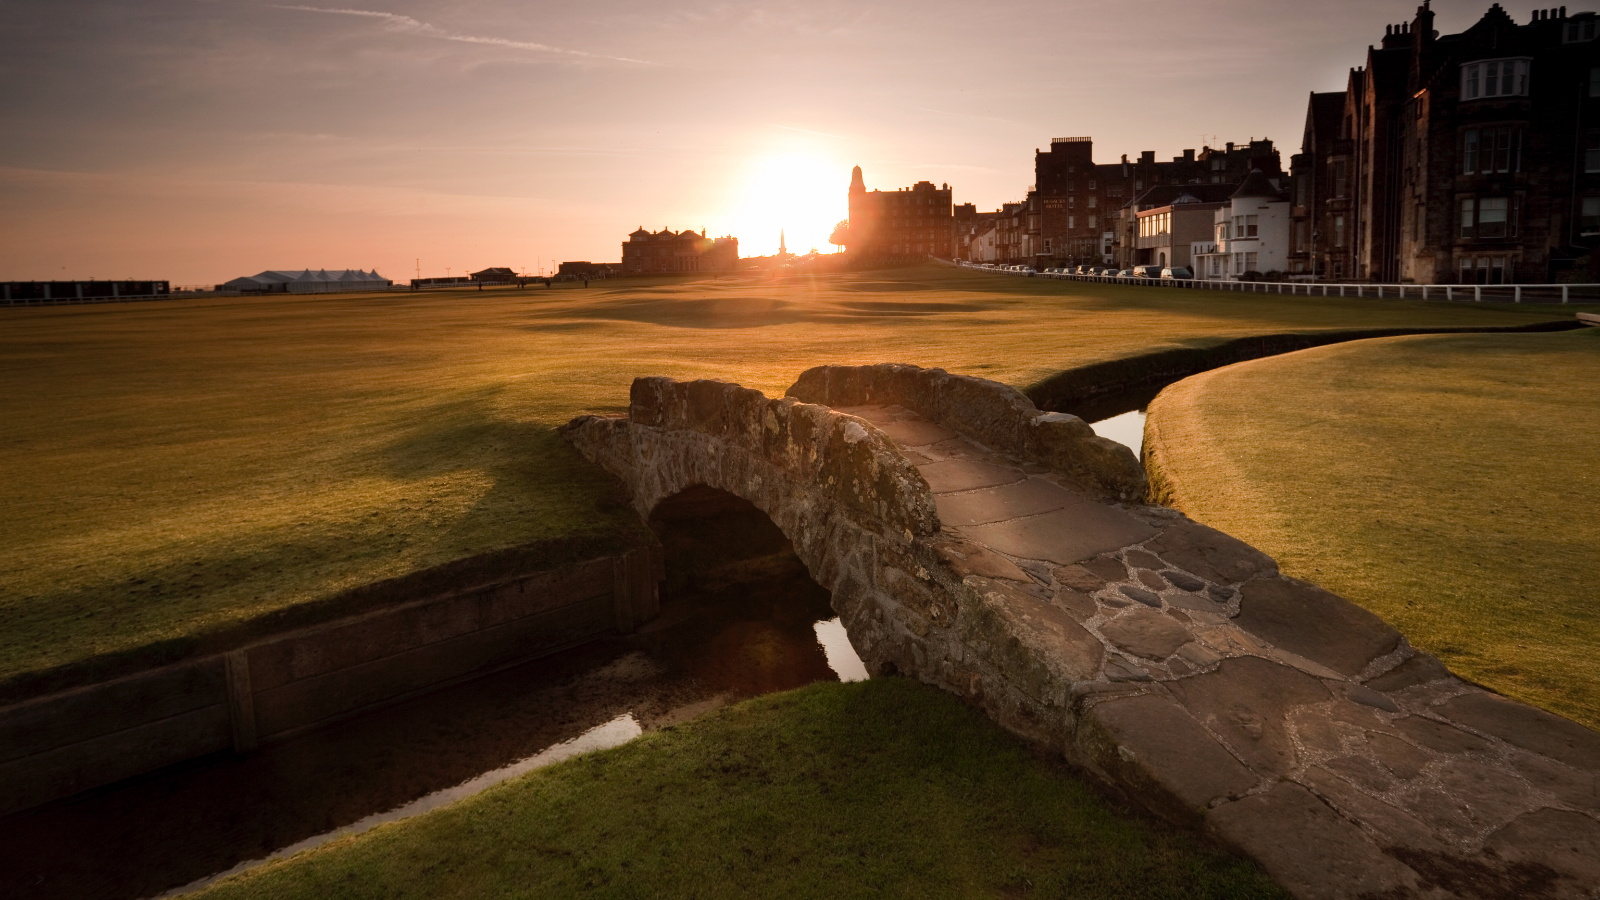 The Home of Golf at St. Andrews Links in Fife, Scotland